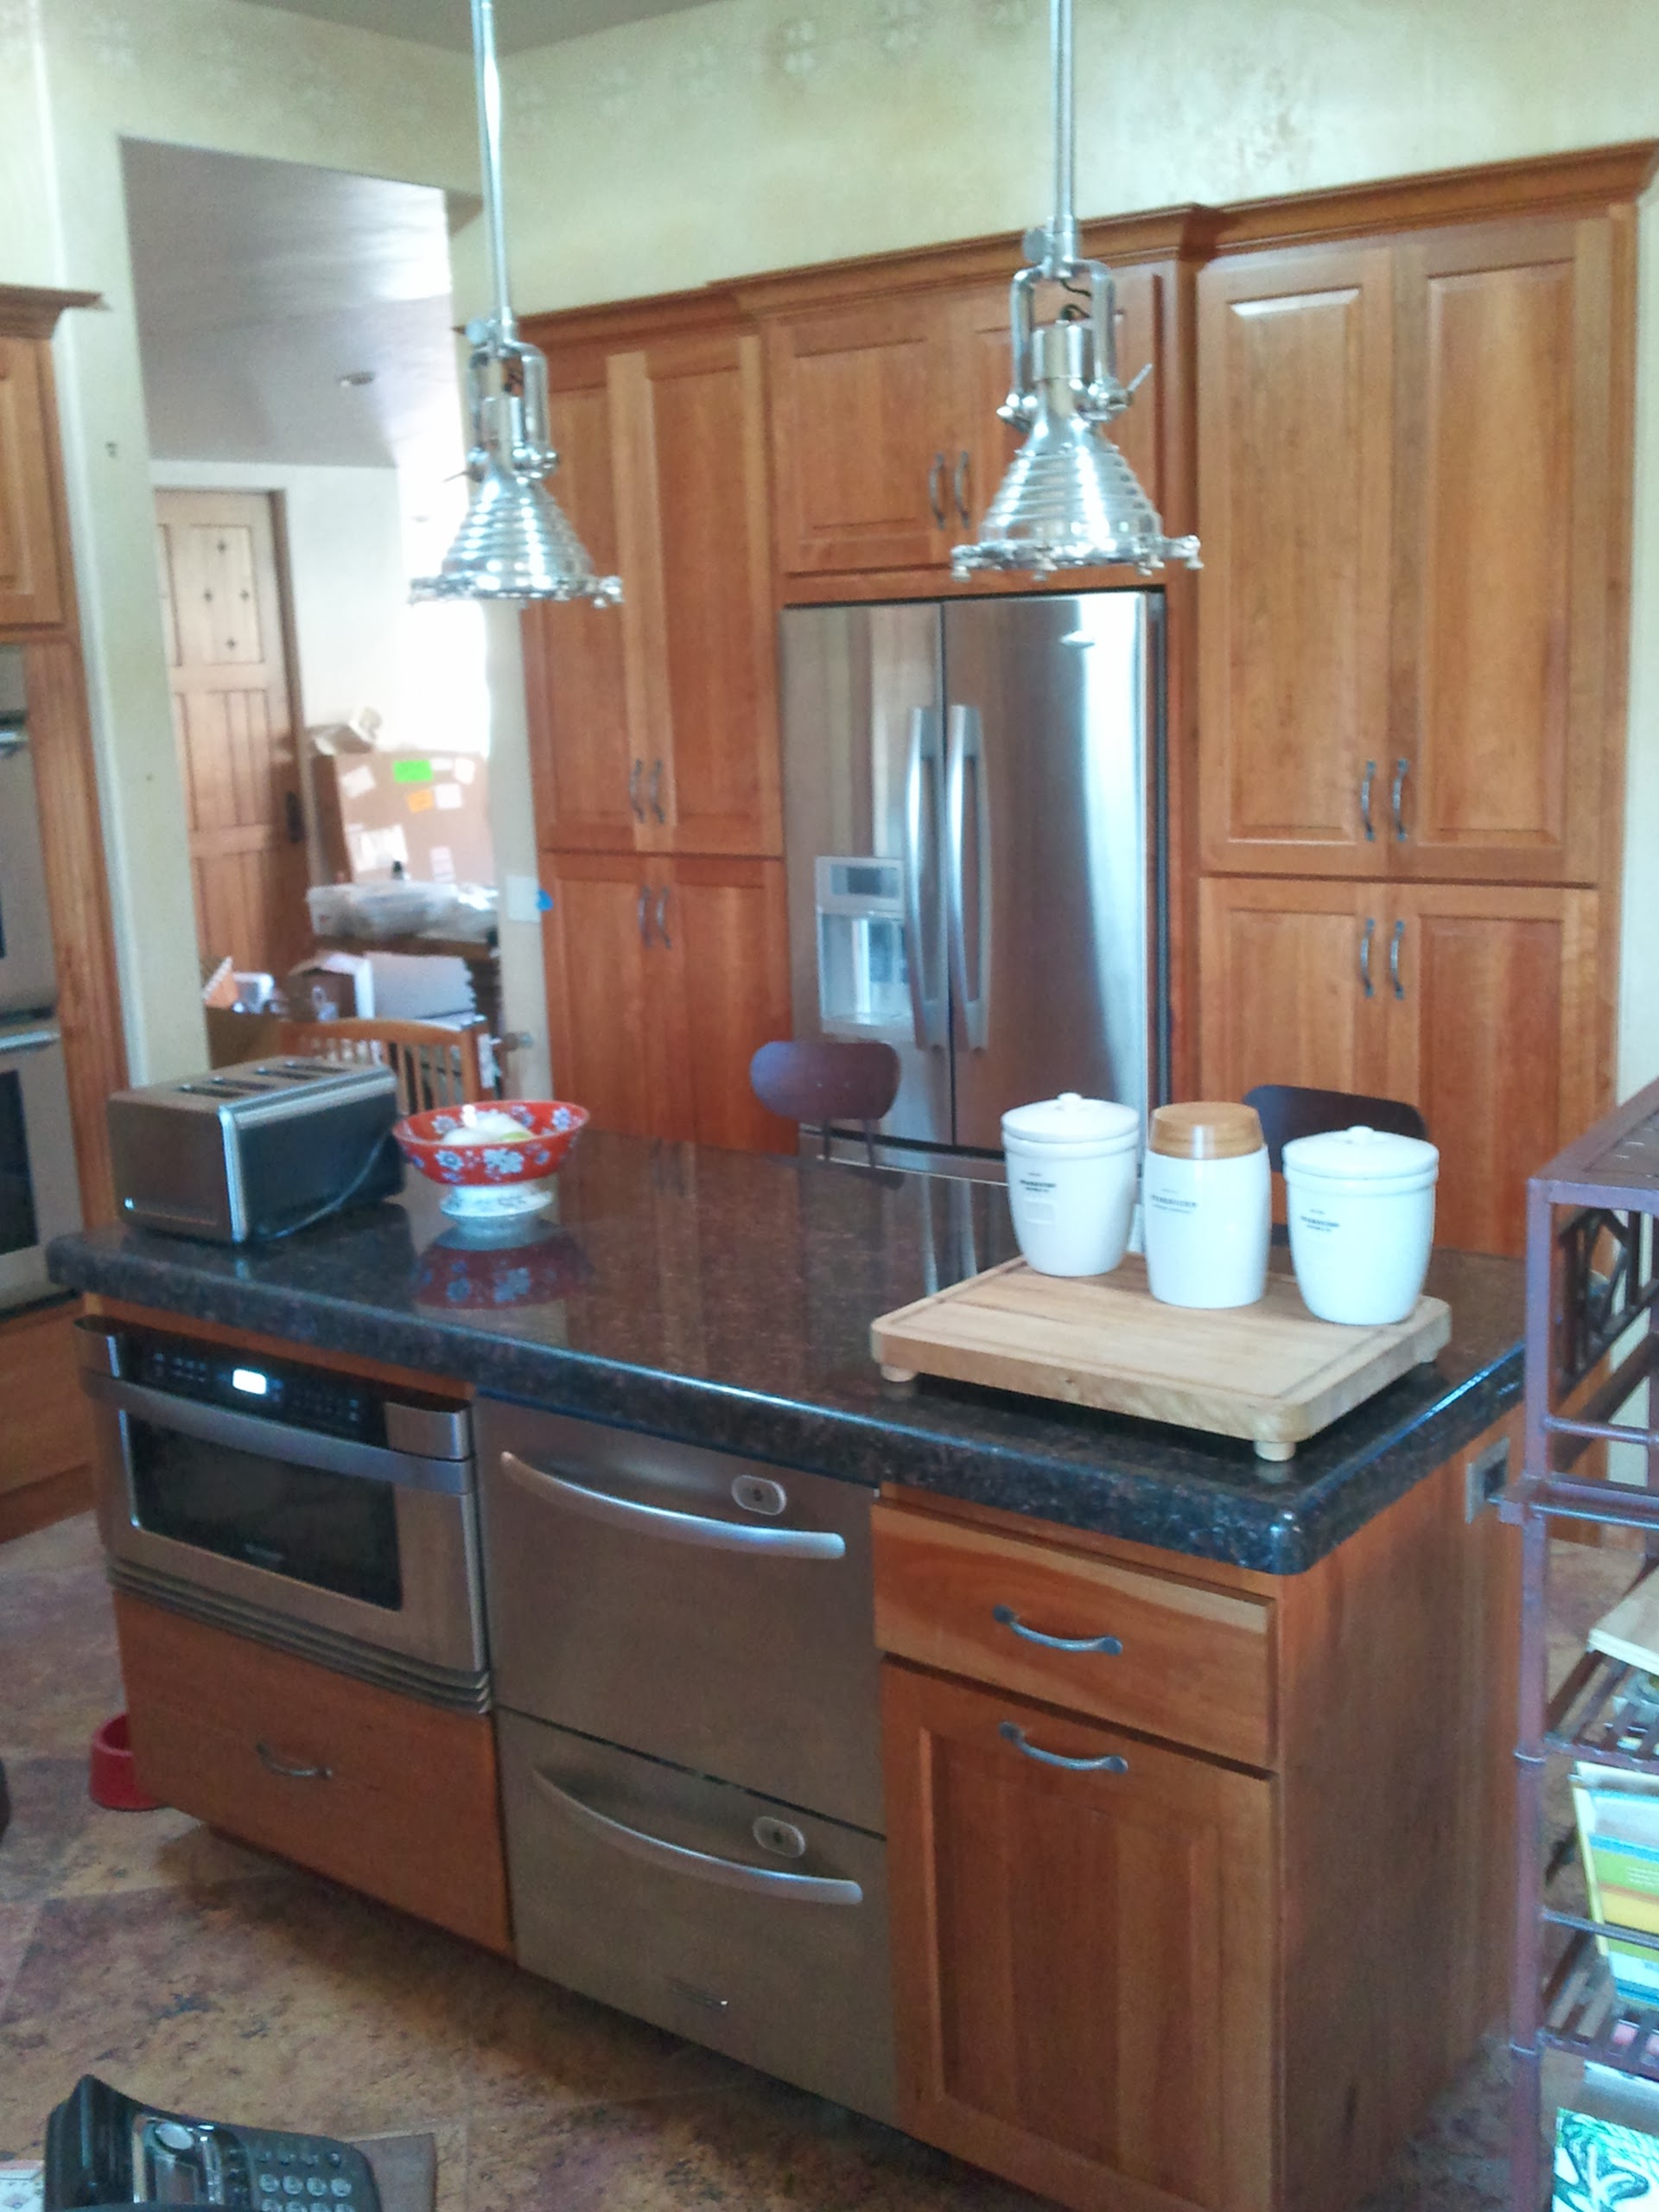 Island with Double Dish Washer and Microwave Oven - Kitchen